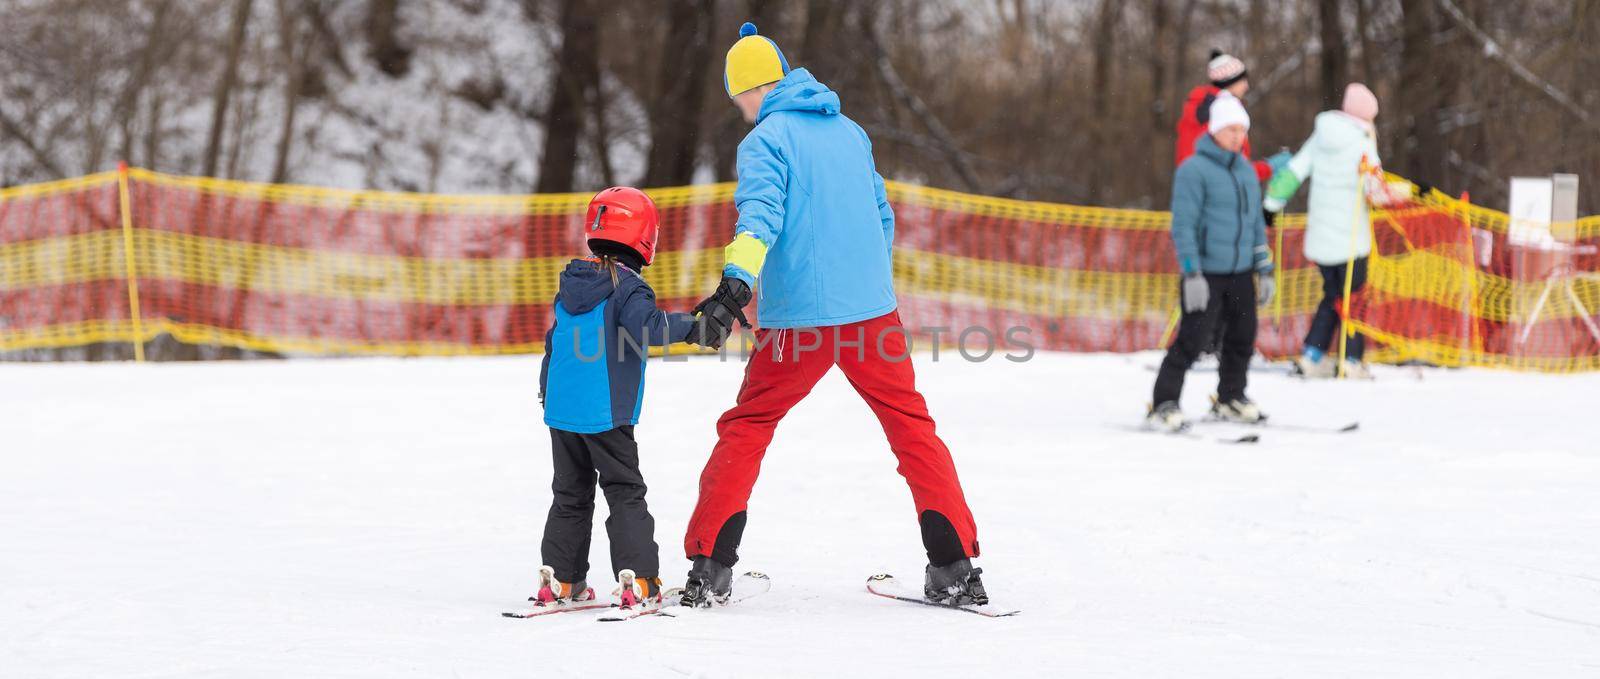 skiing master class for kids with instructor in winter sports school for children. by Andelov13